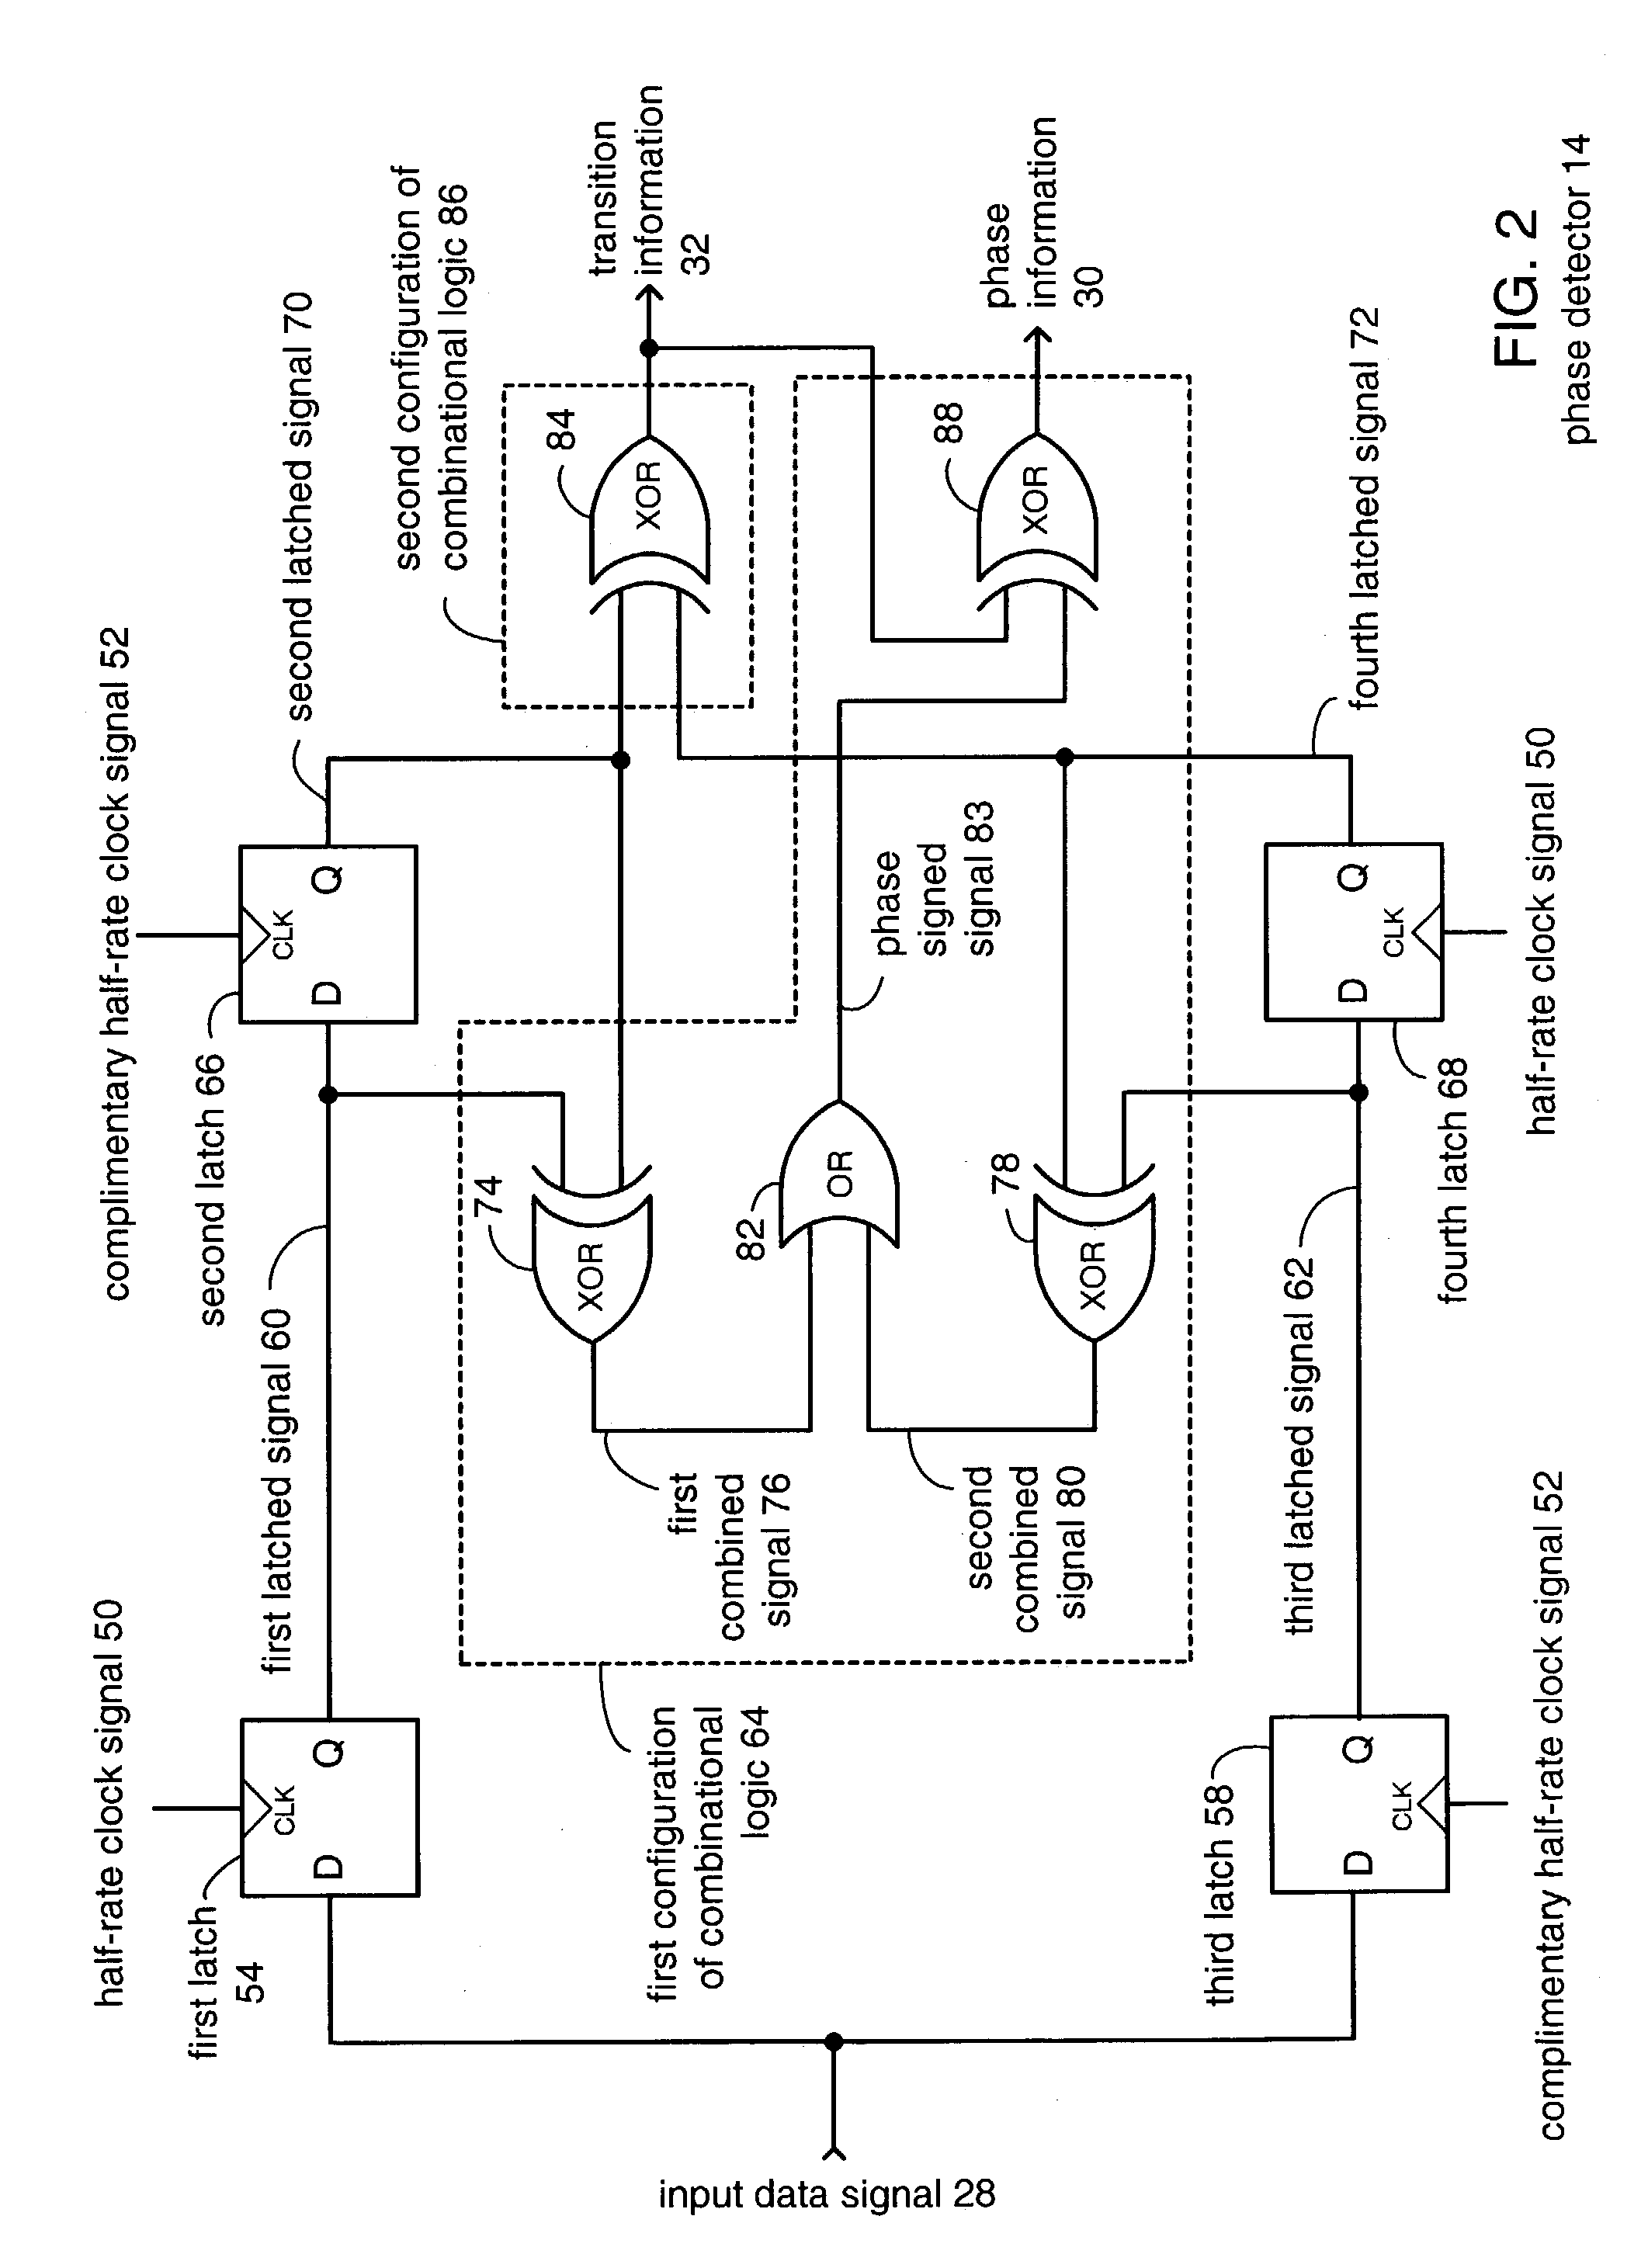 High speed phase detector architecture